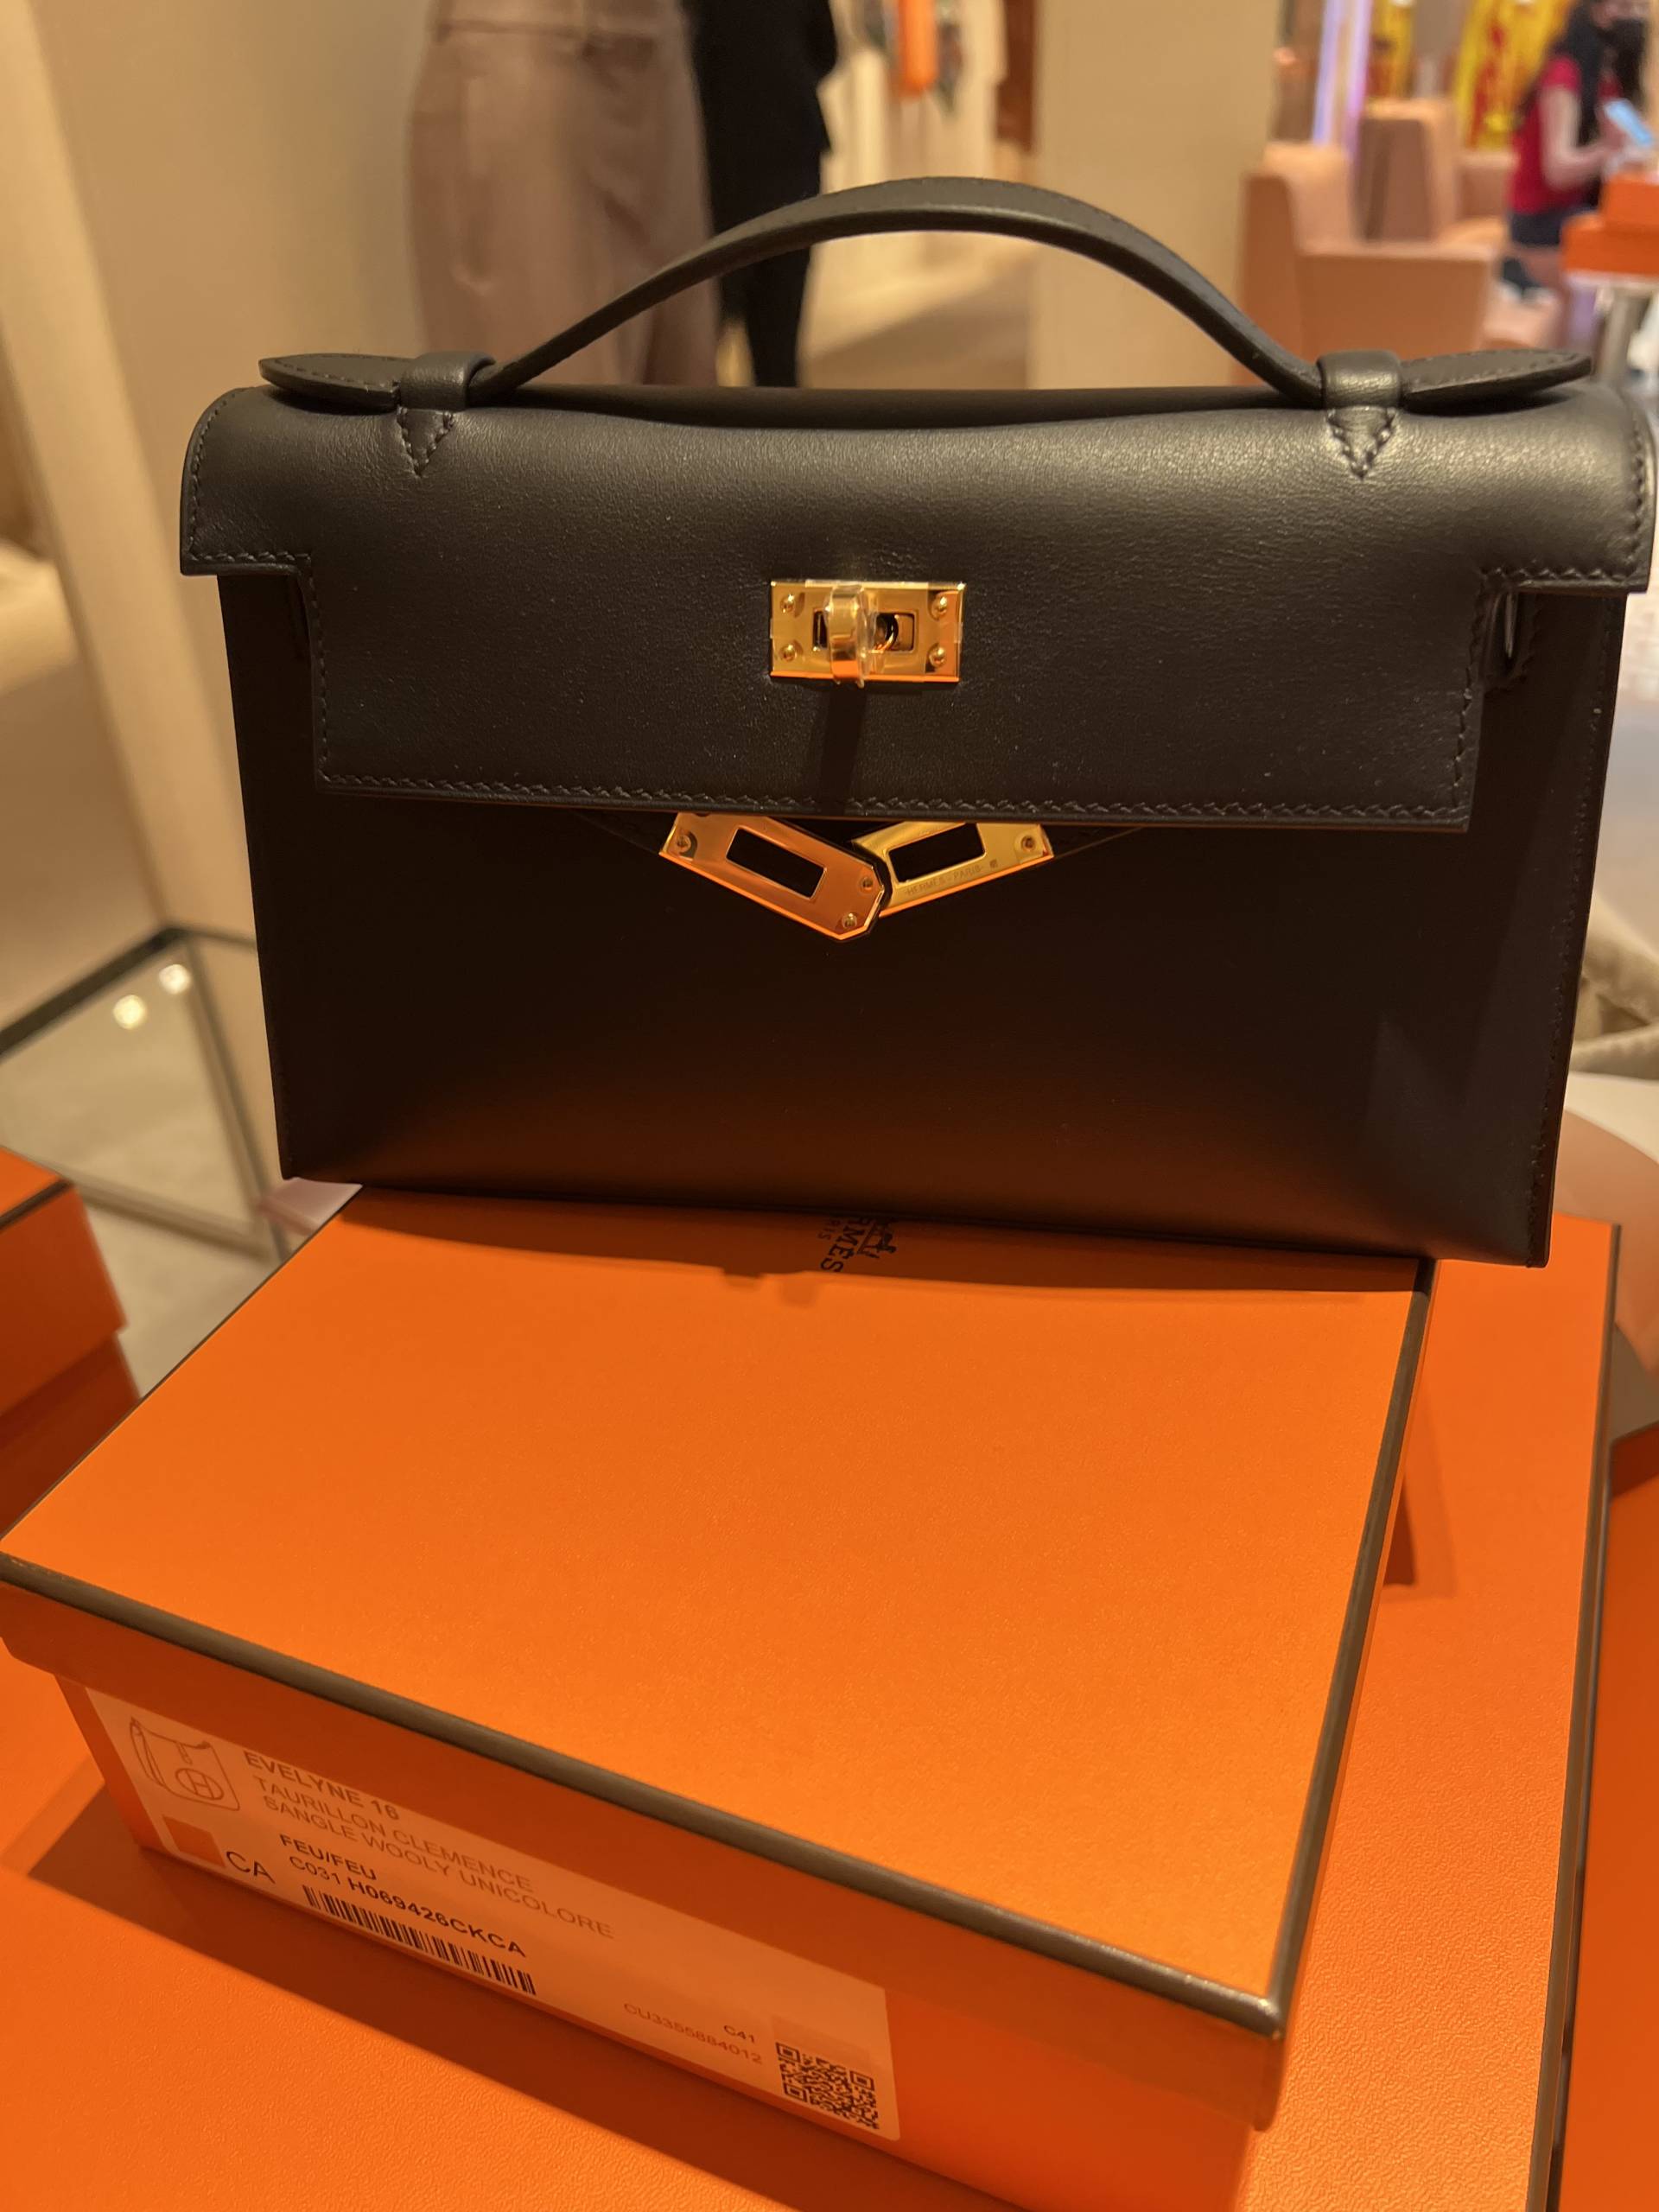 My favorite purchases from a recent trip to Paris : r/handbags